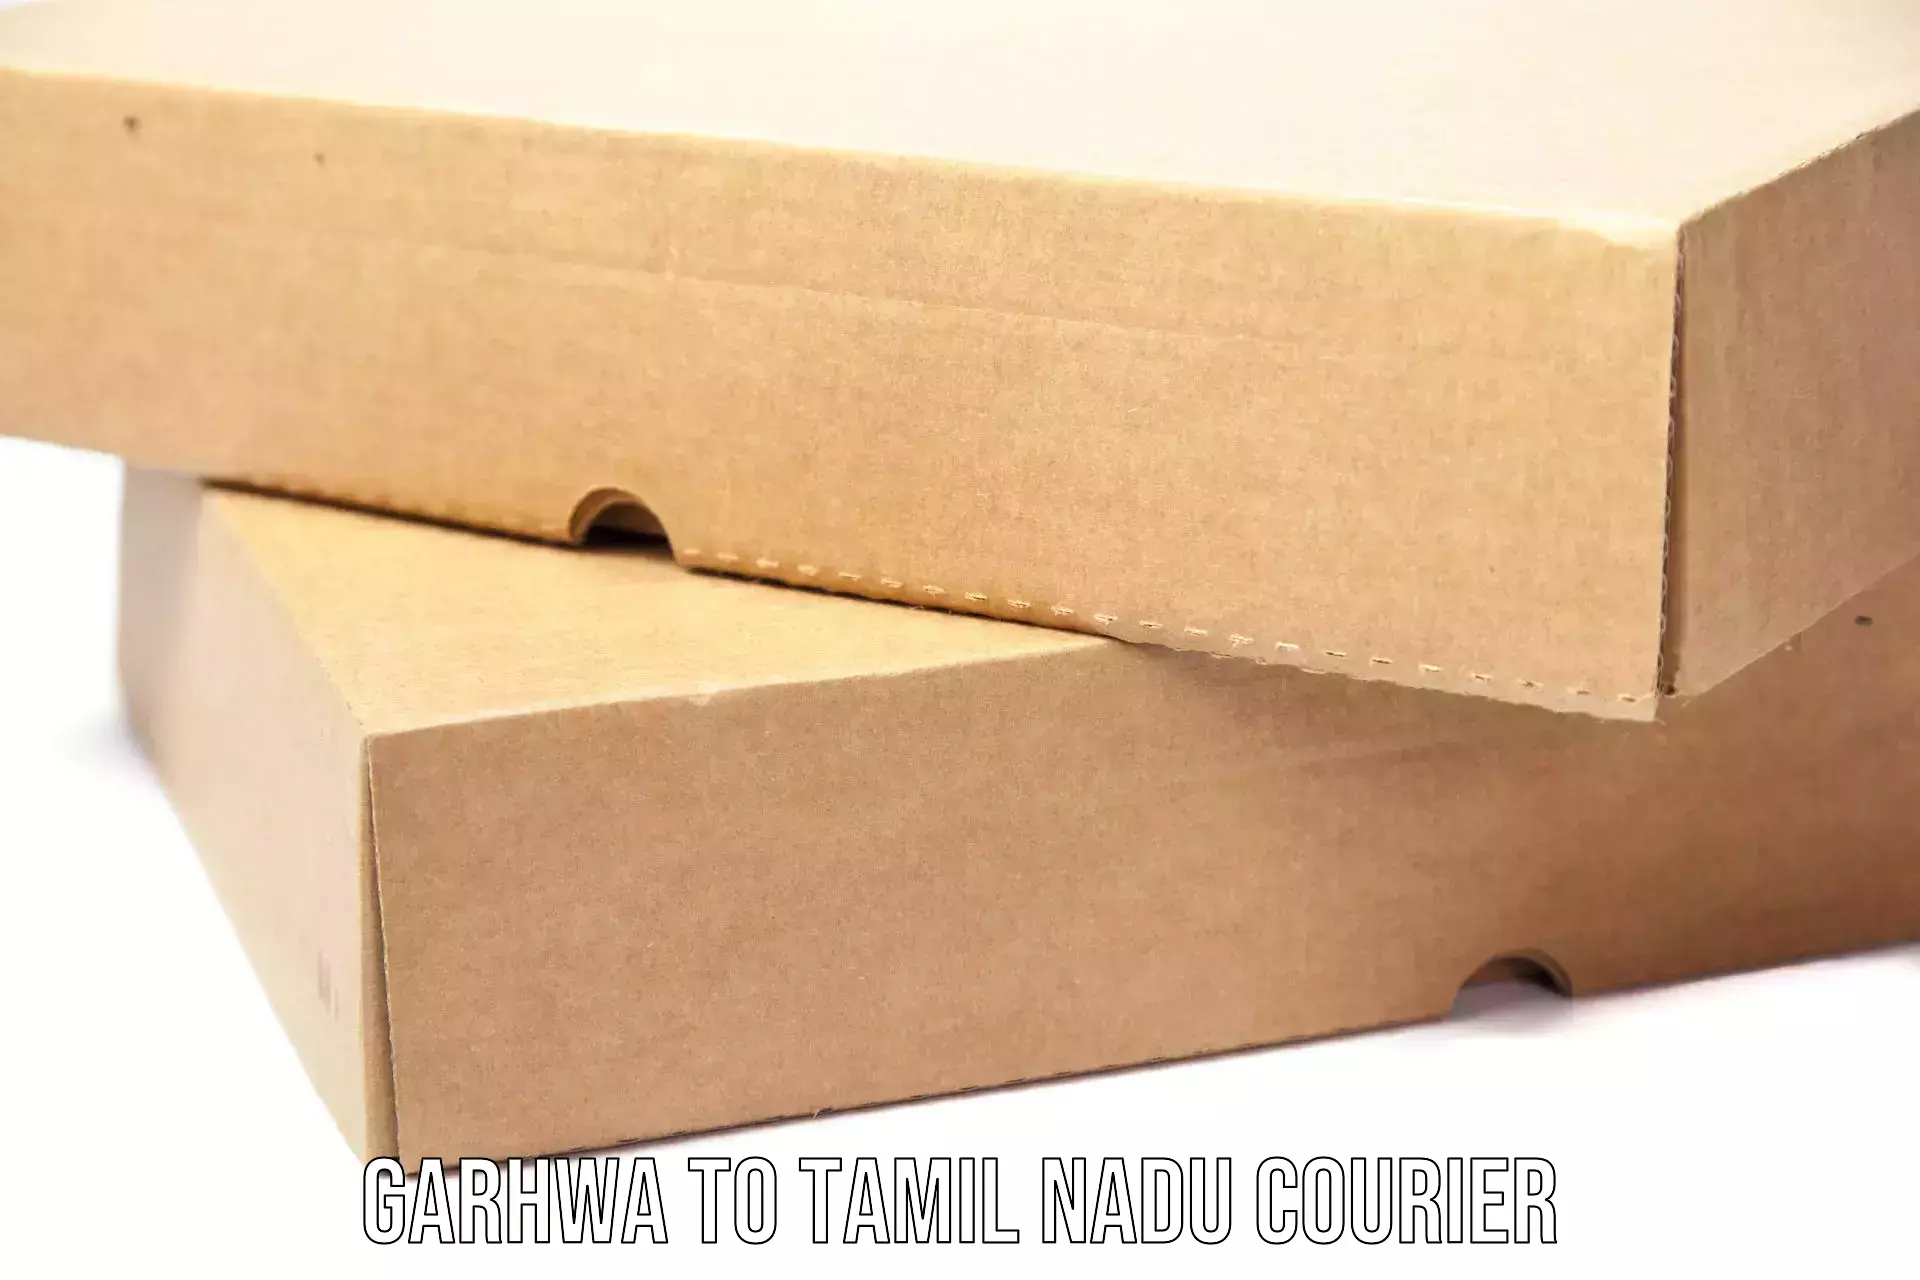 Courier service comparison Garhwa to Rajapalayam